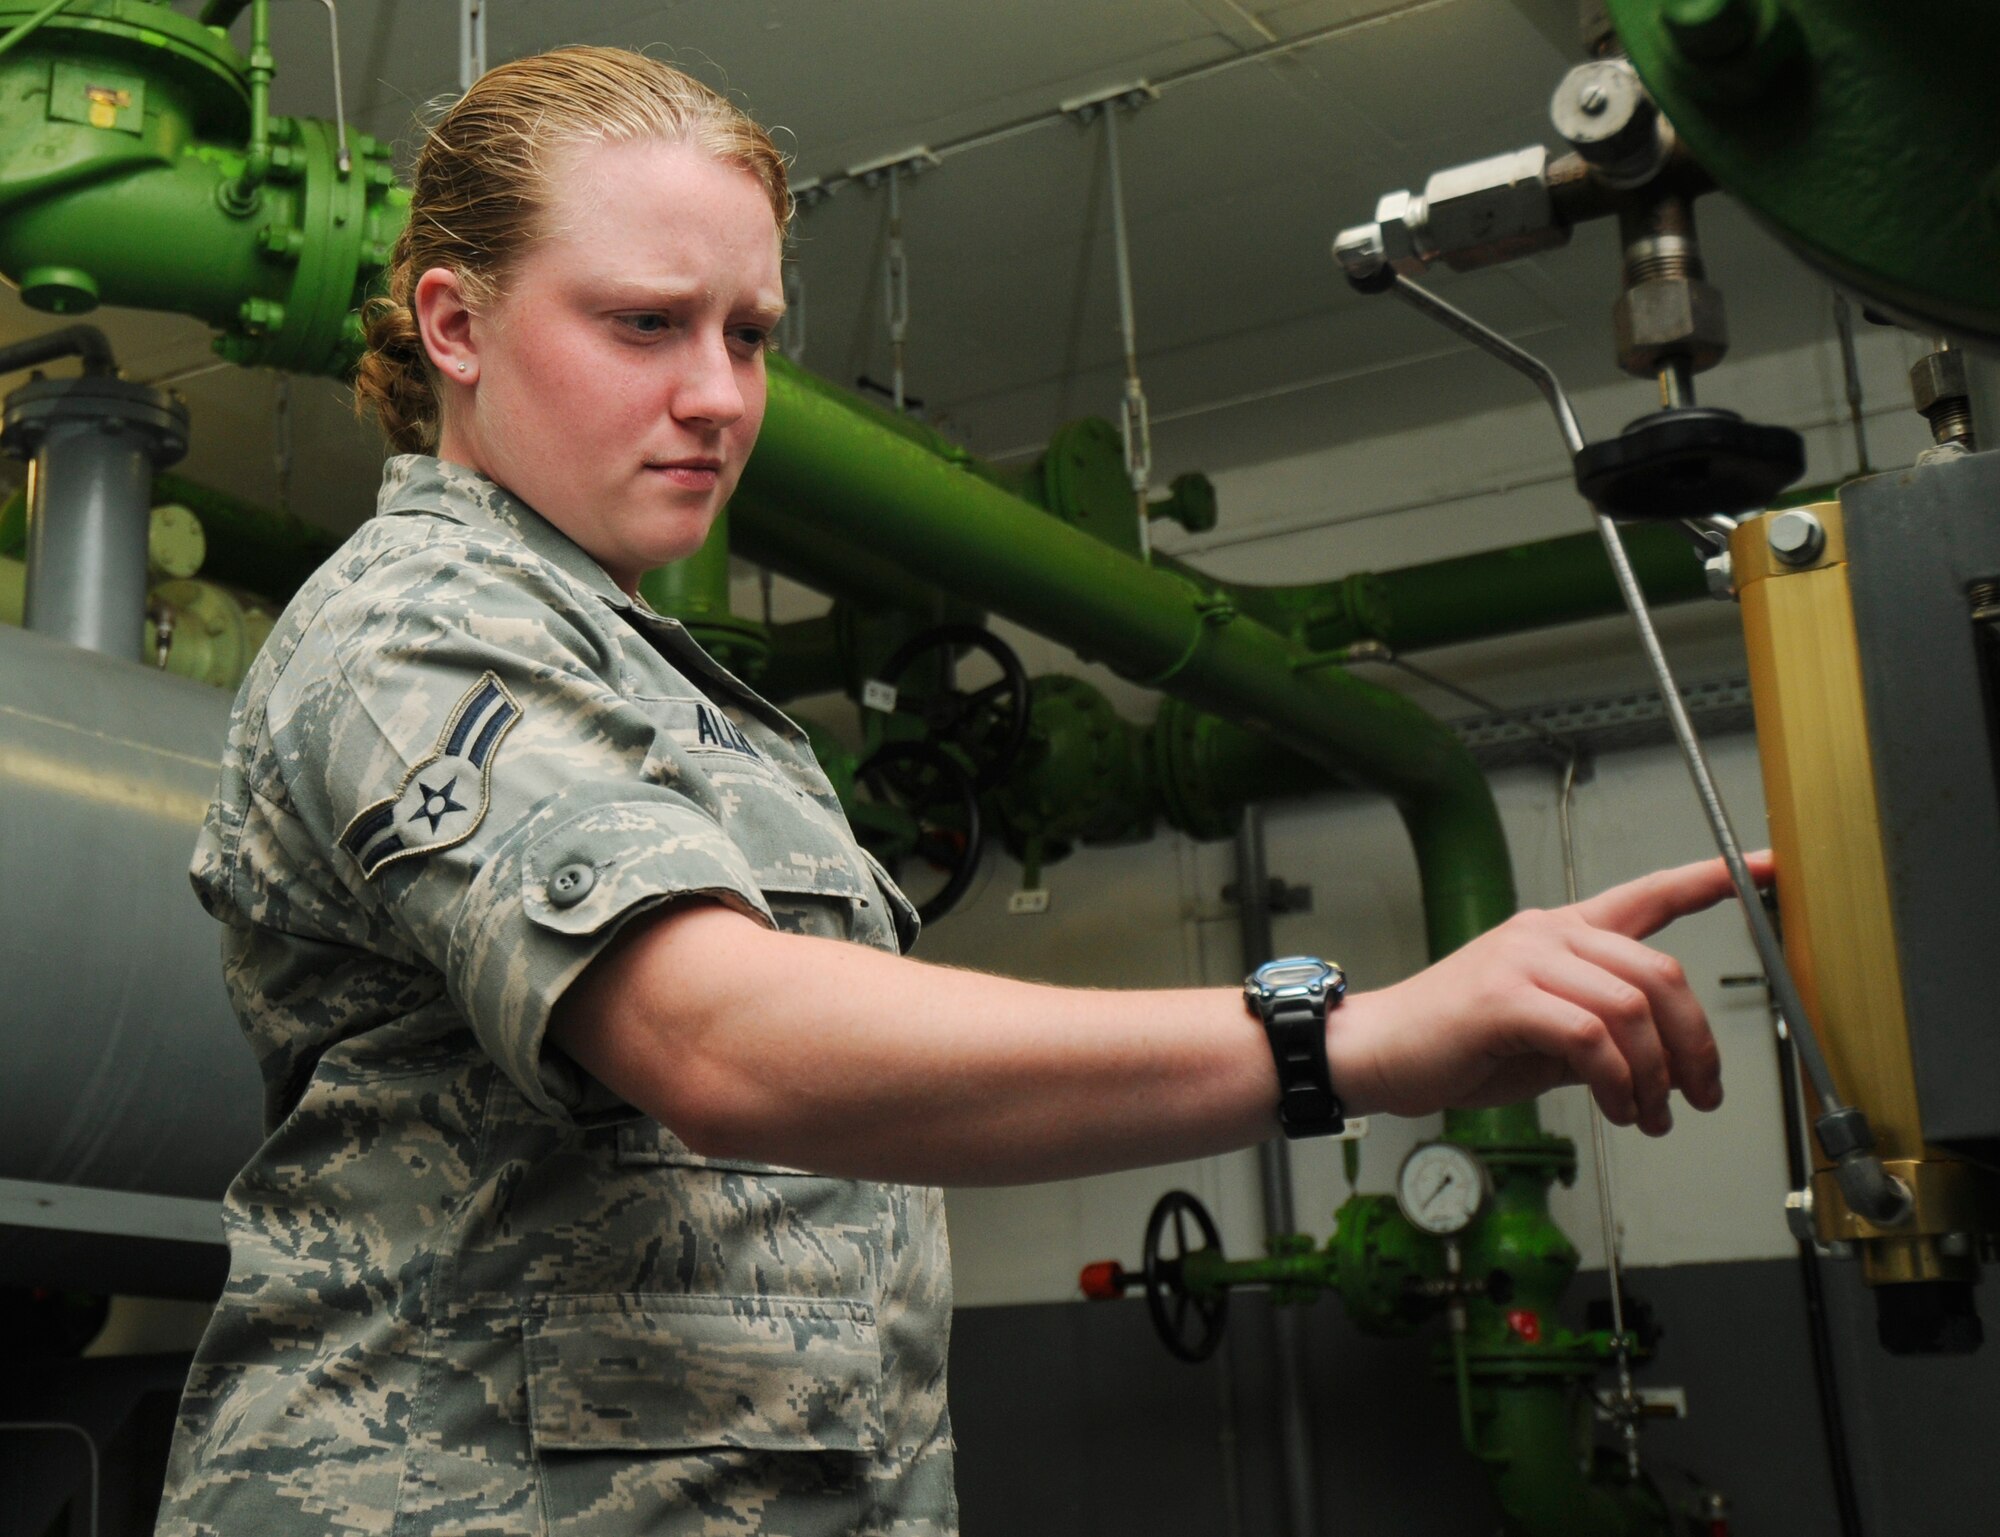 SPANGDAHLEM AIR BASE, Germany – Airman 1st Class Jennea Allen, 52nd Civil Engineer Squadron, inspects a differential pressure gauge in the filter room of Spangdahlem Air Base’s bulk storage area July 23. Gauges on this system are checked regularly to ensure the filter system is function properly and there is no water contaminating the fuel. The liquid fuels flight manages 2,300 meters of fuel pipeline, 23 underground fuel tanks and 8.2 million gallons of JP-8. (U.S. Air Force photo by Senior Airman Benjamin Wilson)